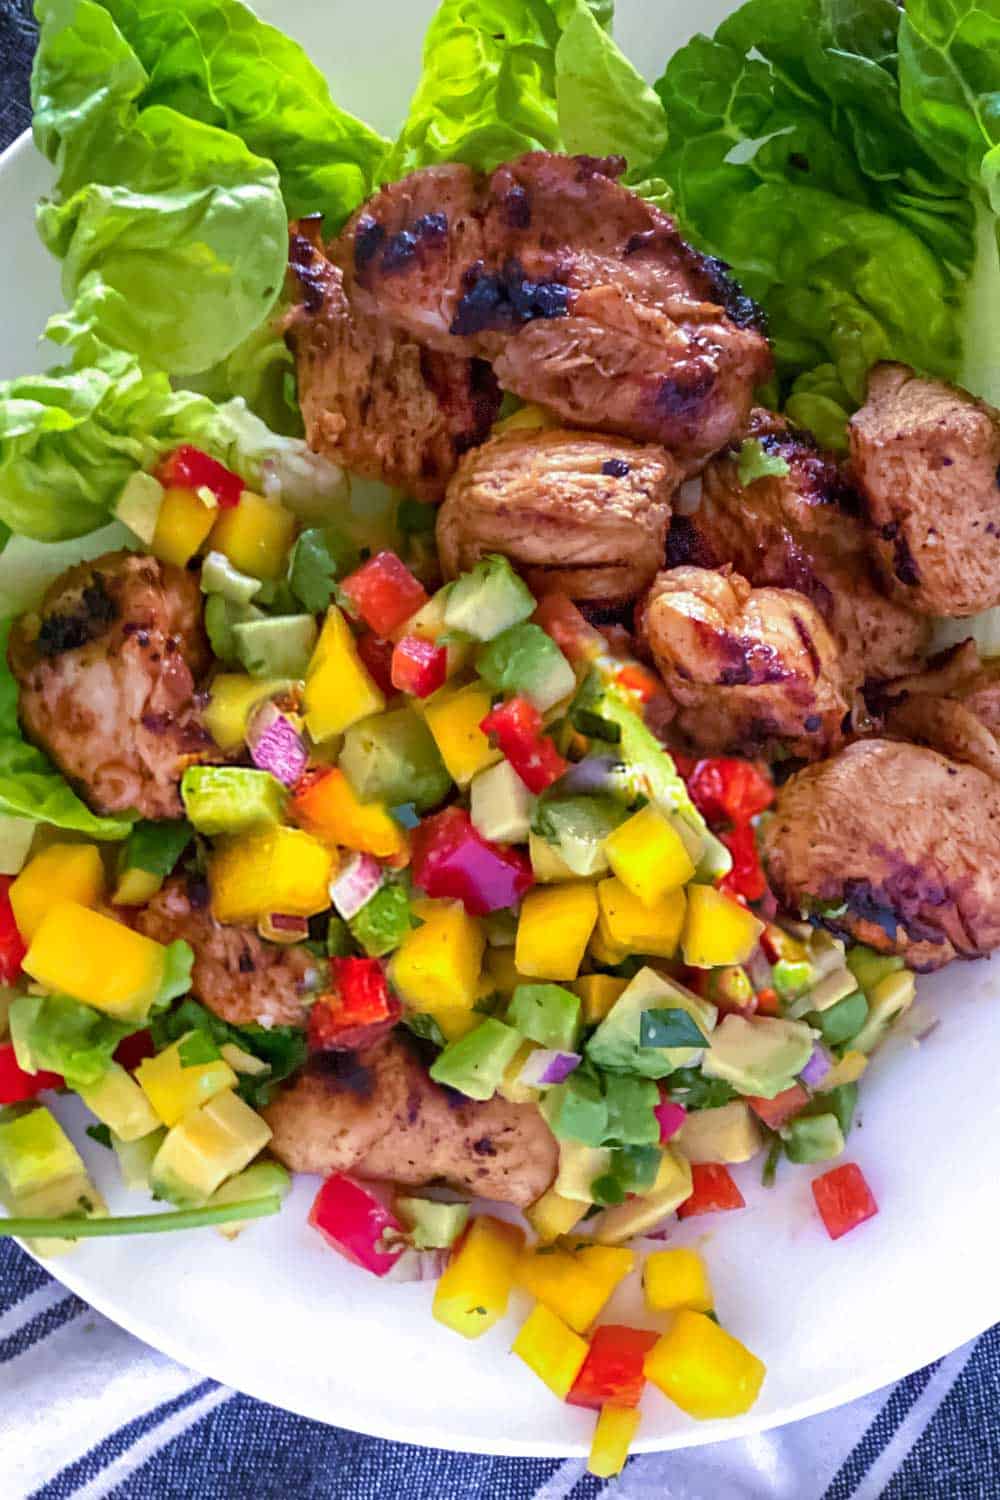 Chunks of Mexican chicken with nectarine salsa